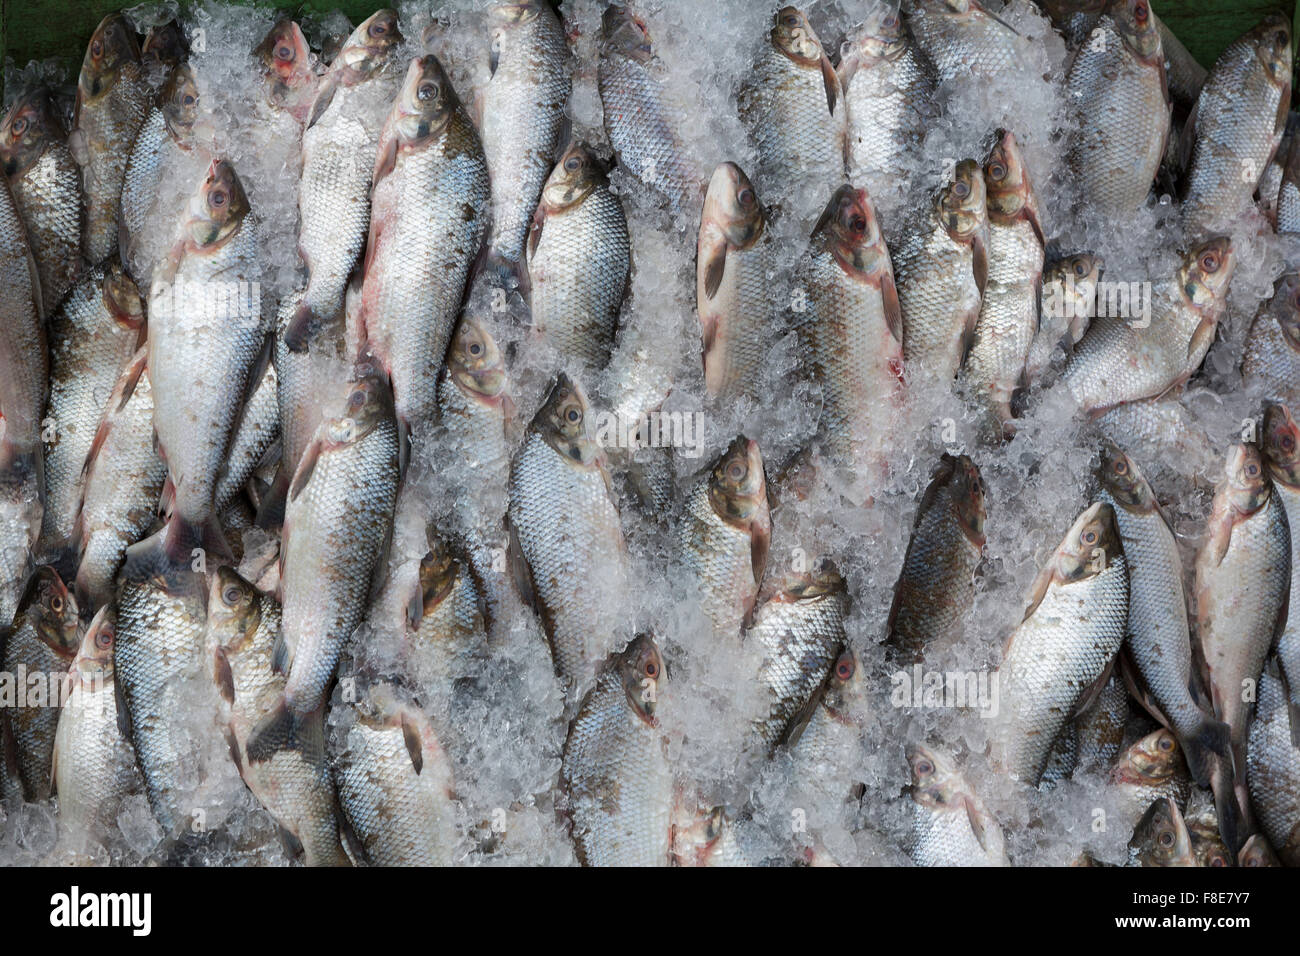 Background of large group of fish in ices seen from above at the fish market of Manaus, Brazil 2015 Stock Photo